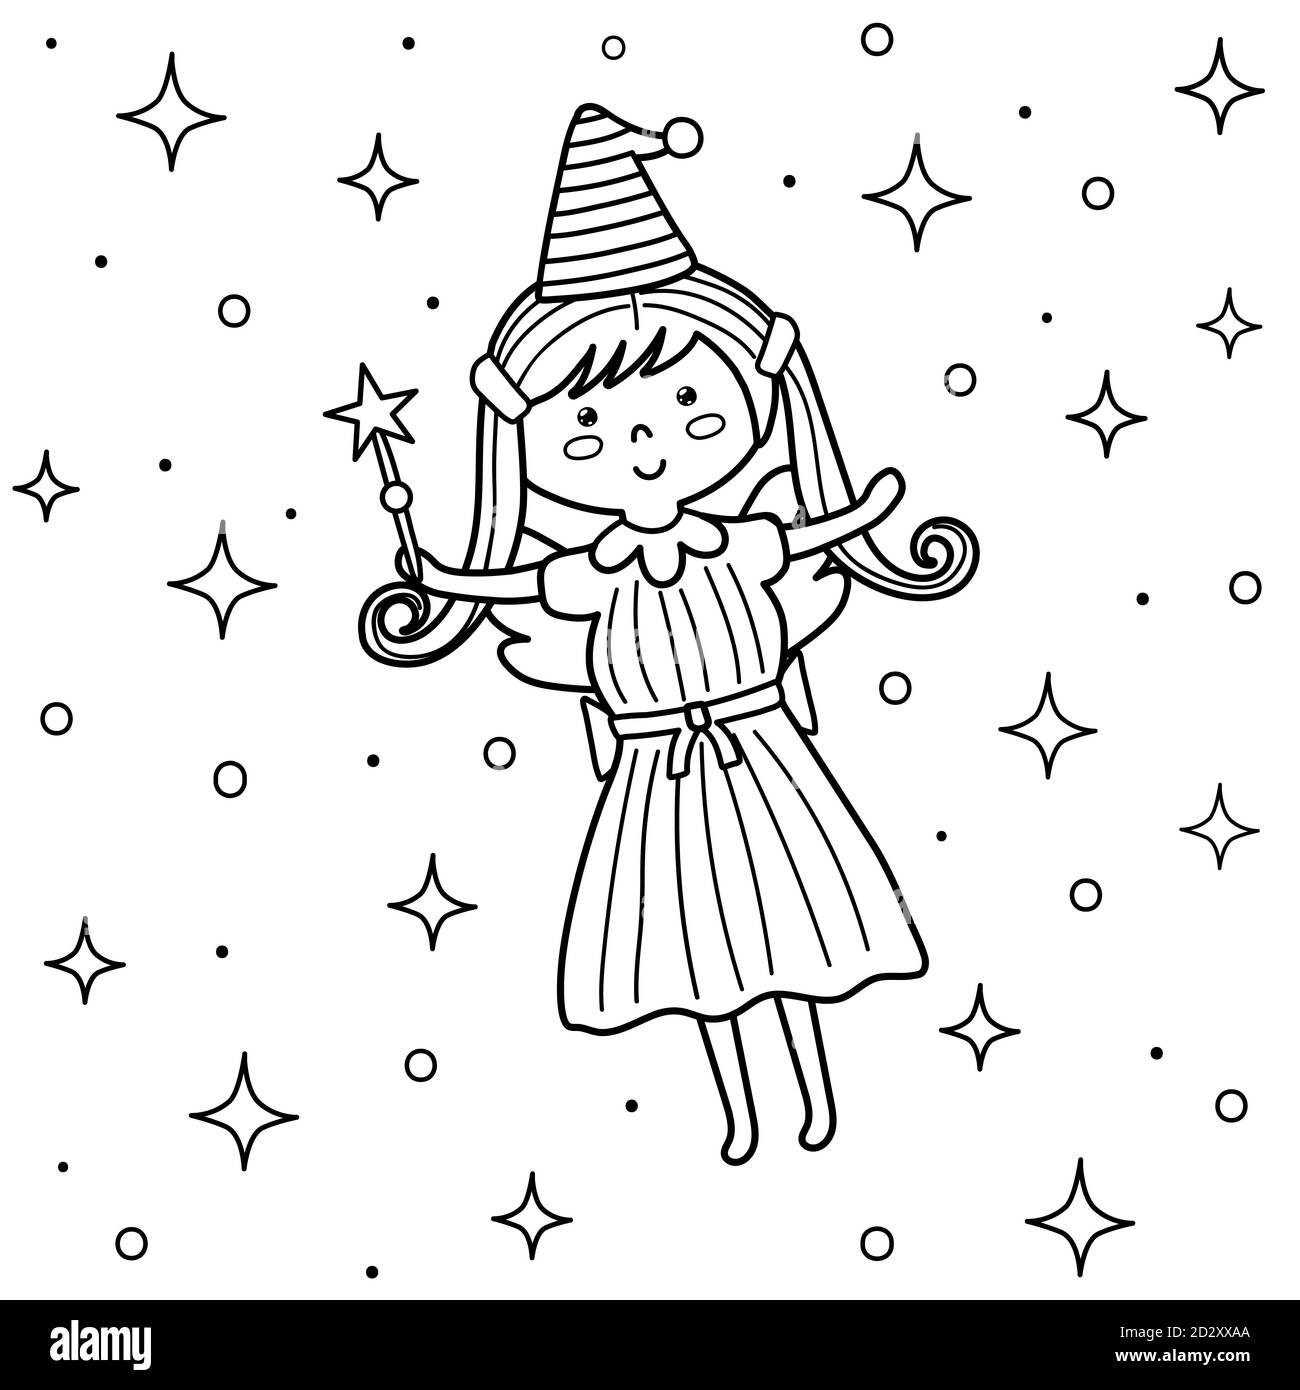 Cute fairy with a magic wand in the sky coloring page fantasy coloring book stock vector image art